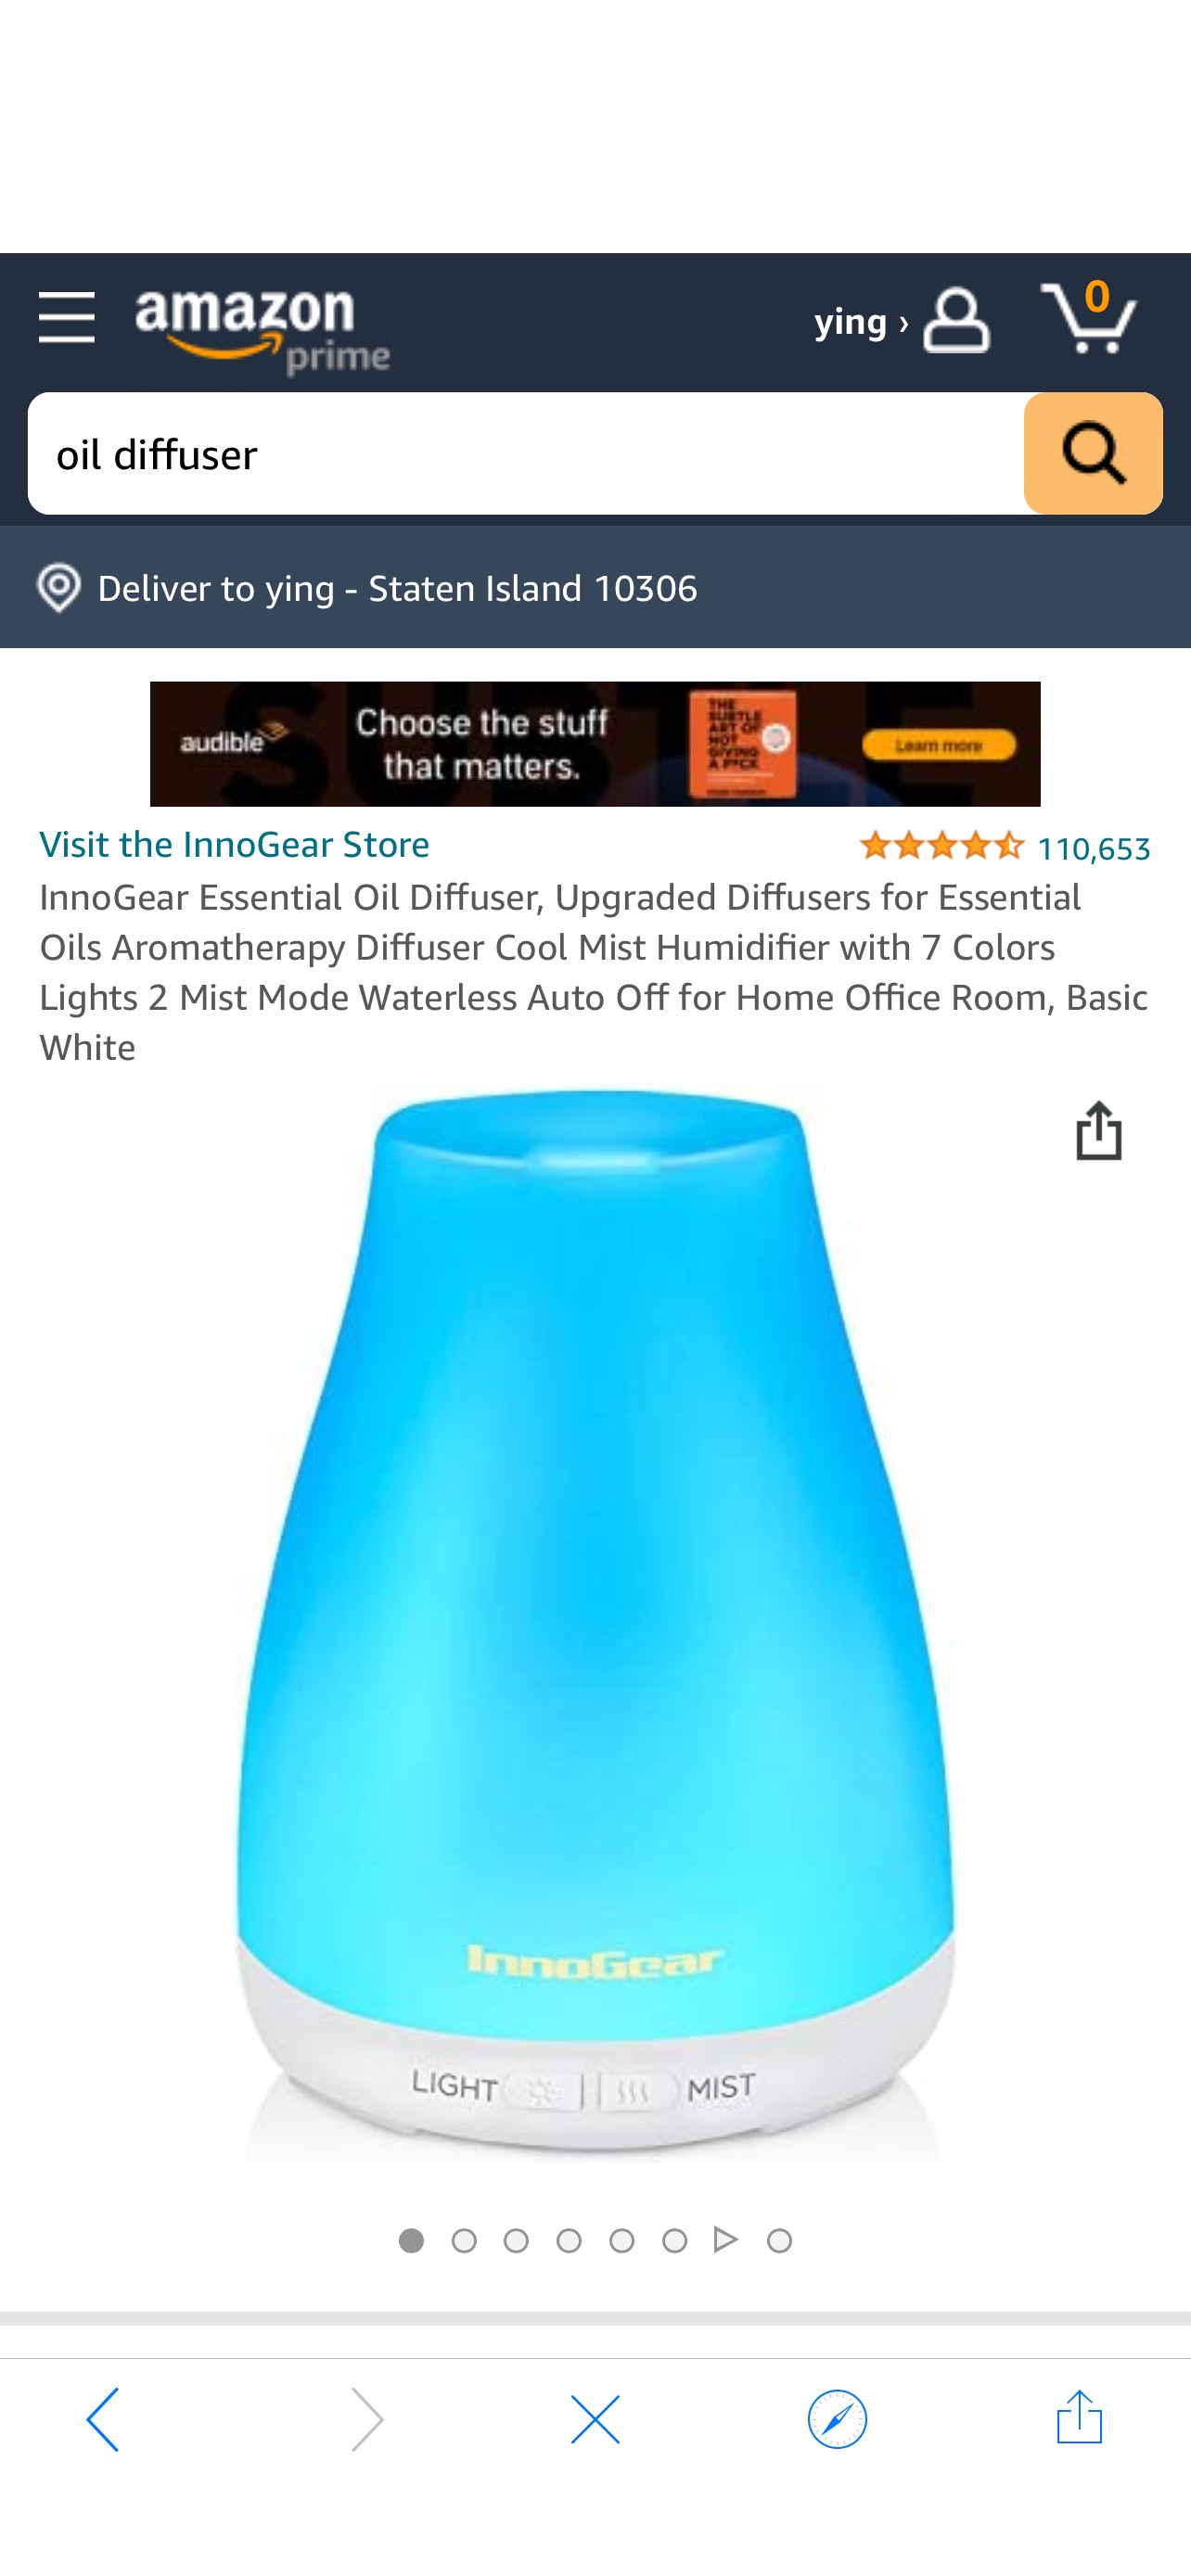 Amazon.com : InnoGear Essential Oil Diffuser, Upgraded Diffusers for Essential Oils Aromatherapy Diffuser Cool Mist Humidifier with 7 Colors Lights: Health & Household